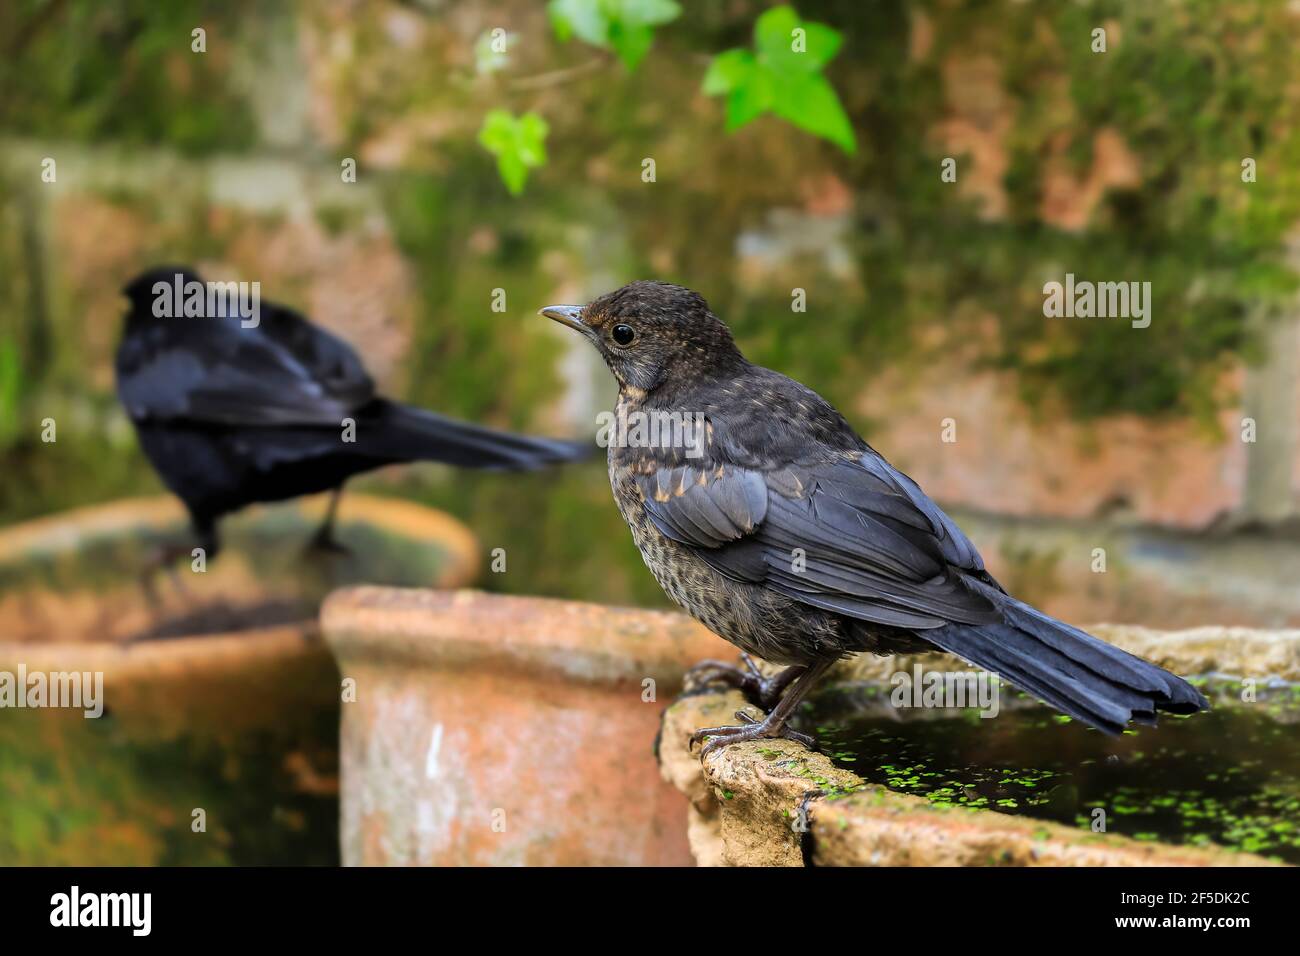 Juvenile Common blackbird (Turdus merula) waiting for food from it's parent seen beyond, in a Chiltern garden; Henley-on-Thames, Oxfordshire, UK Stock Photo